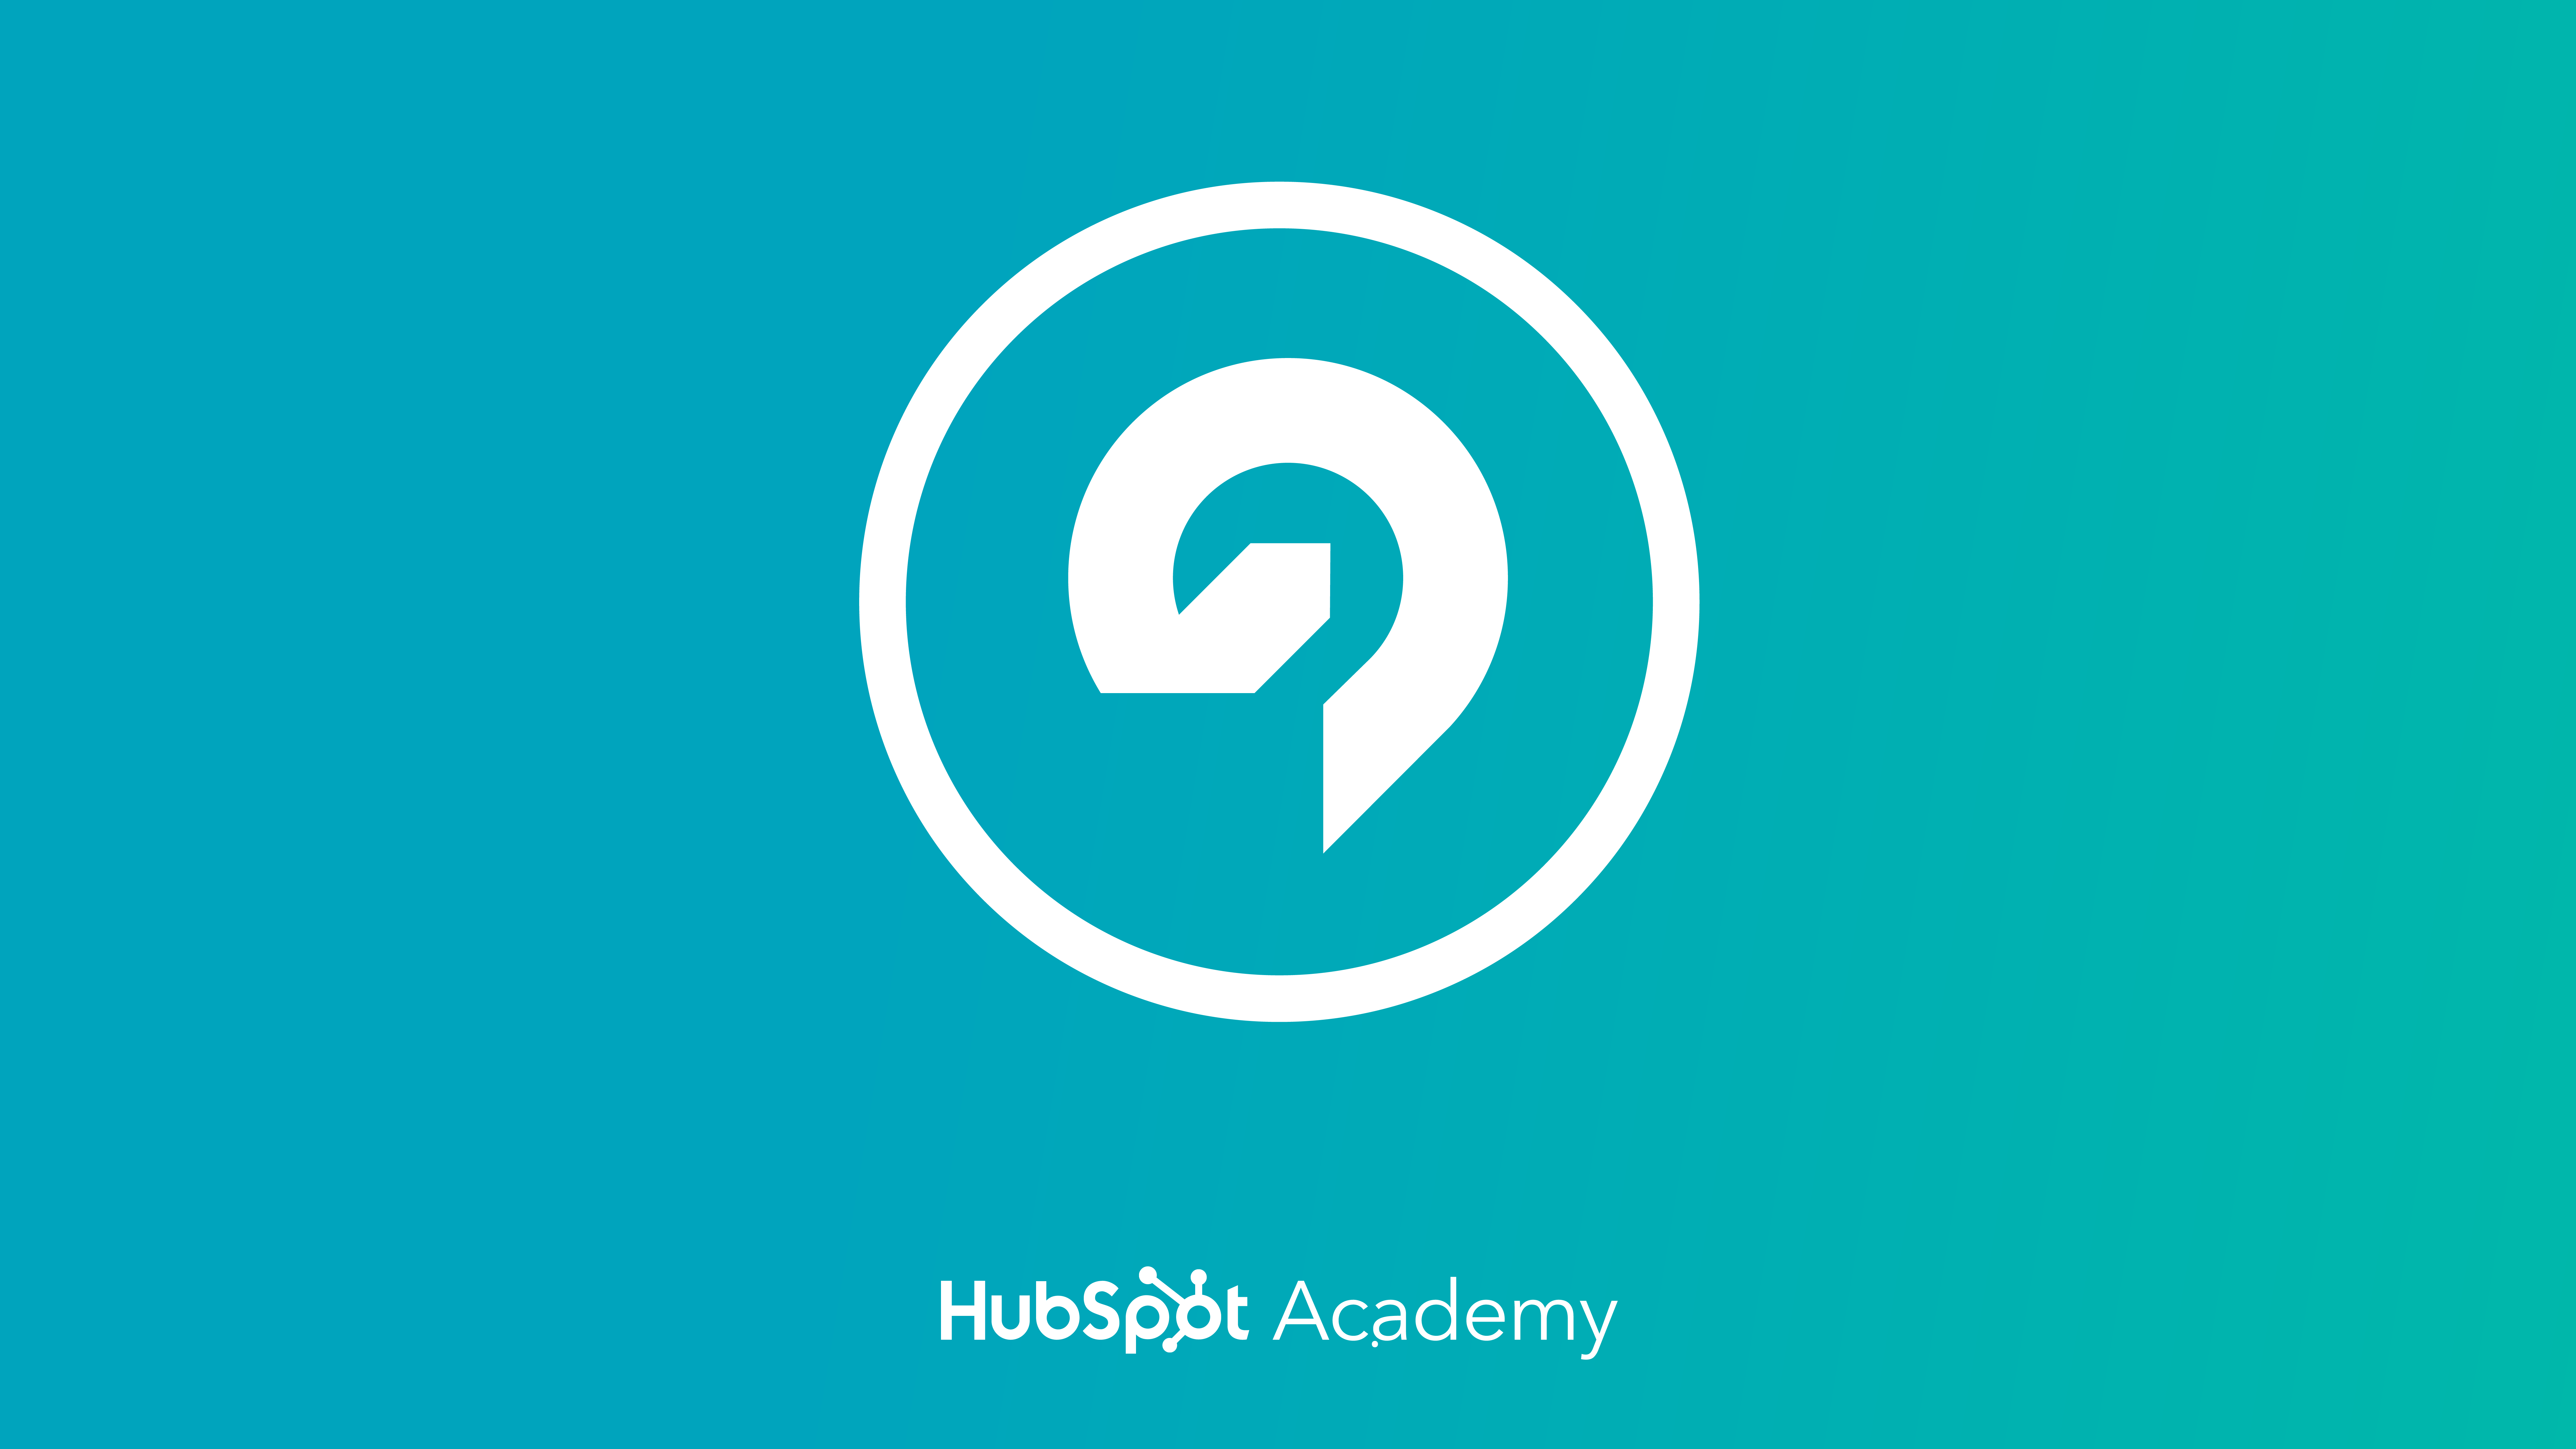 Growth-Driven Design Agency Certification course by HubSpot Academy